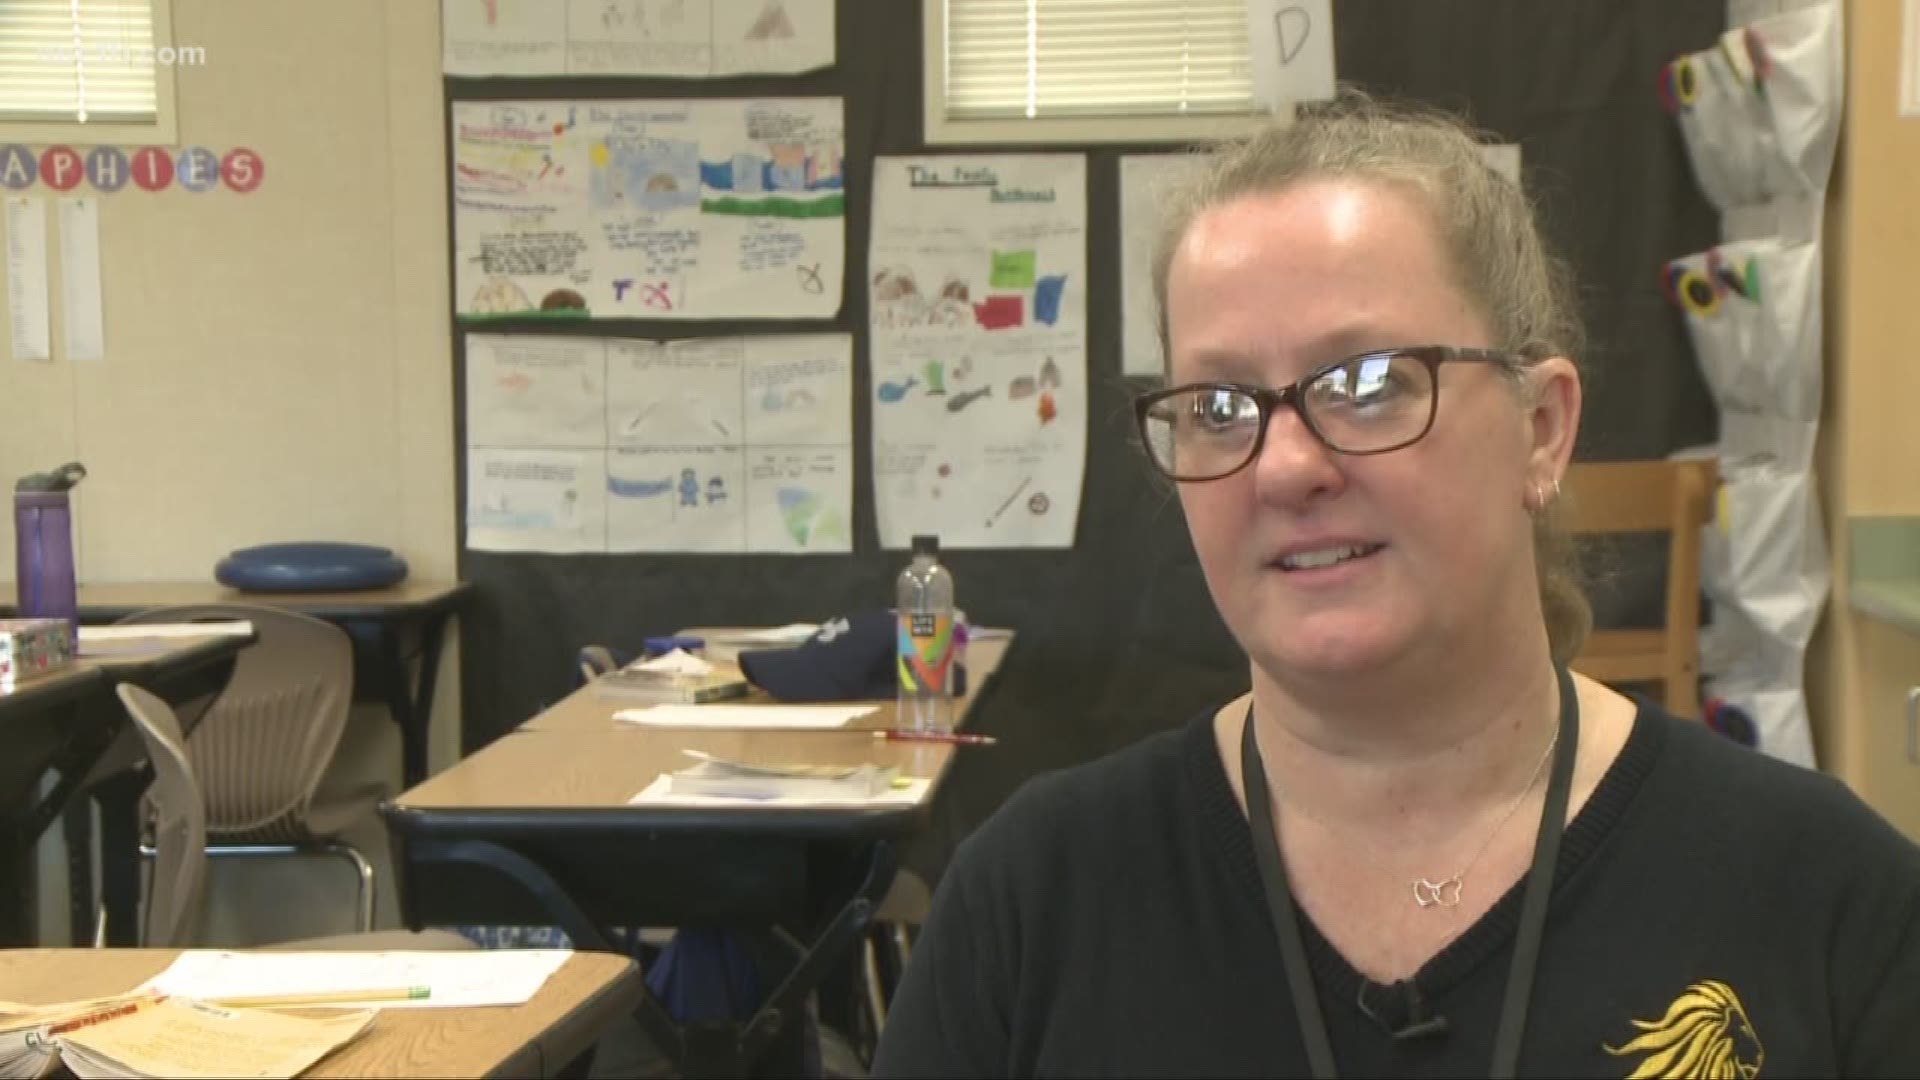 ABC10's Teacher of the Month for February 2019 is Angela Williams, who teaches at Stonegate Elementary in West Sacramento. She says it's easy to do the job when you love what you do.